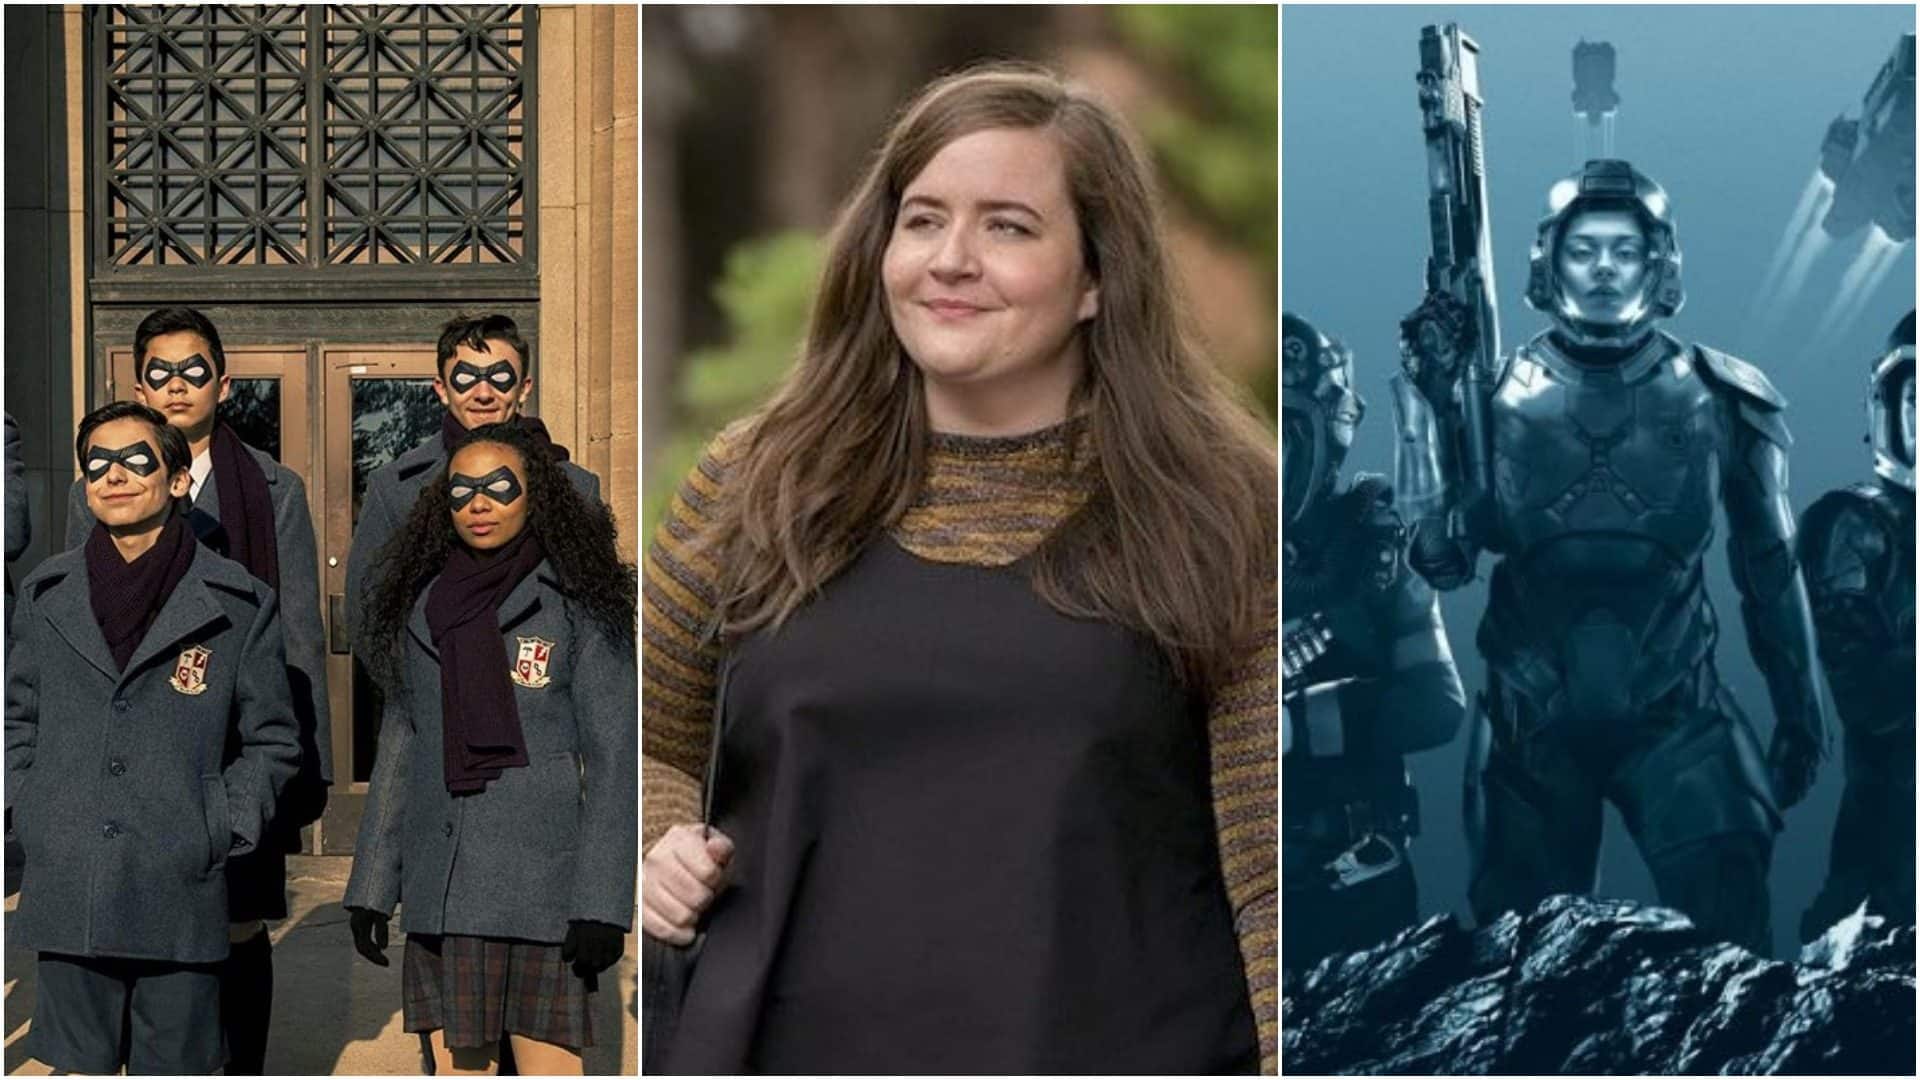 What to Watch on Streaming: Umbrella Academy, Shrill, The Expanse